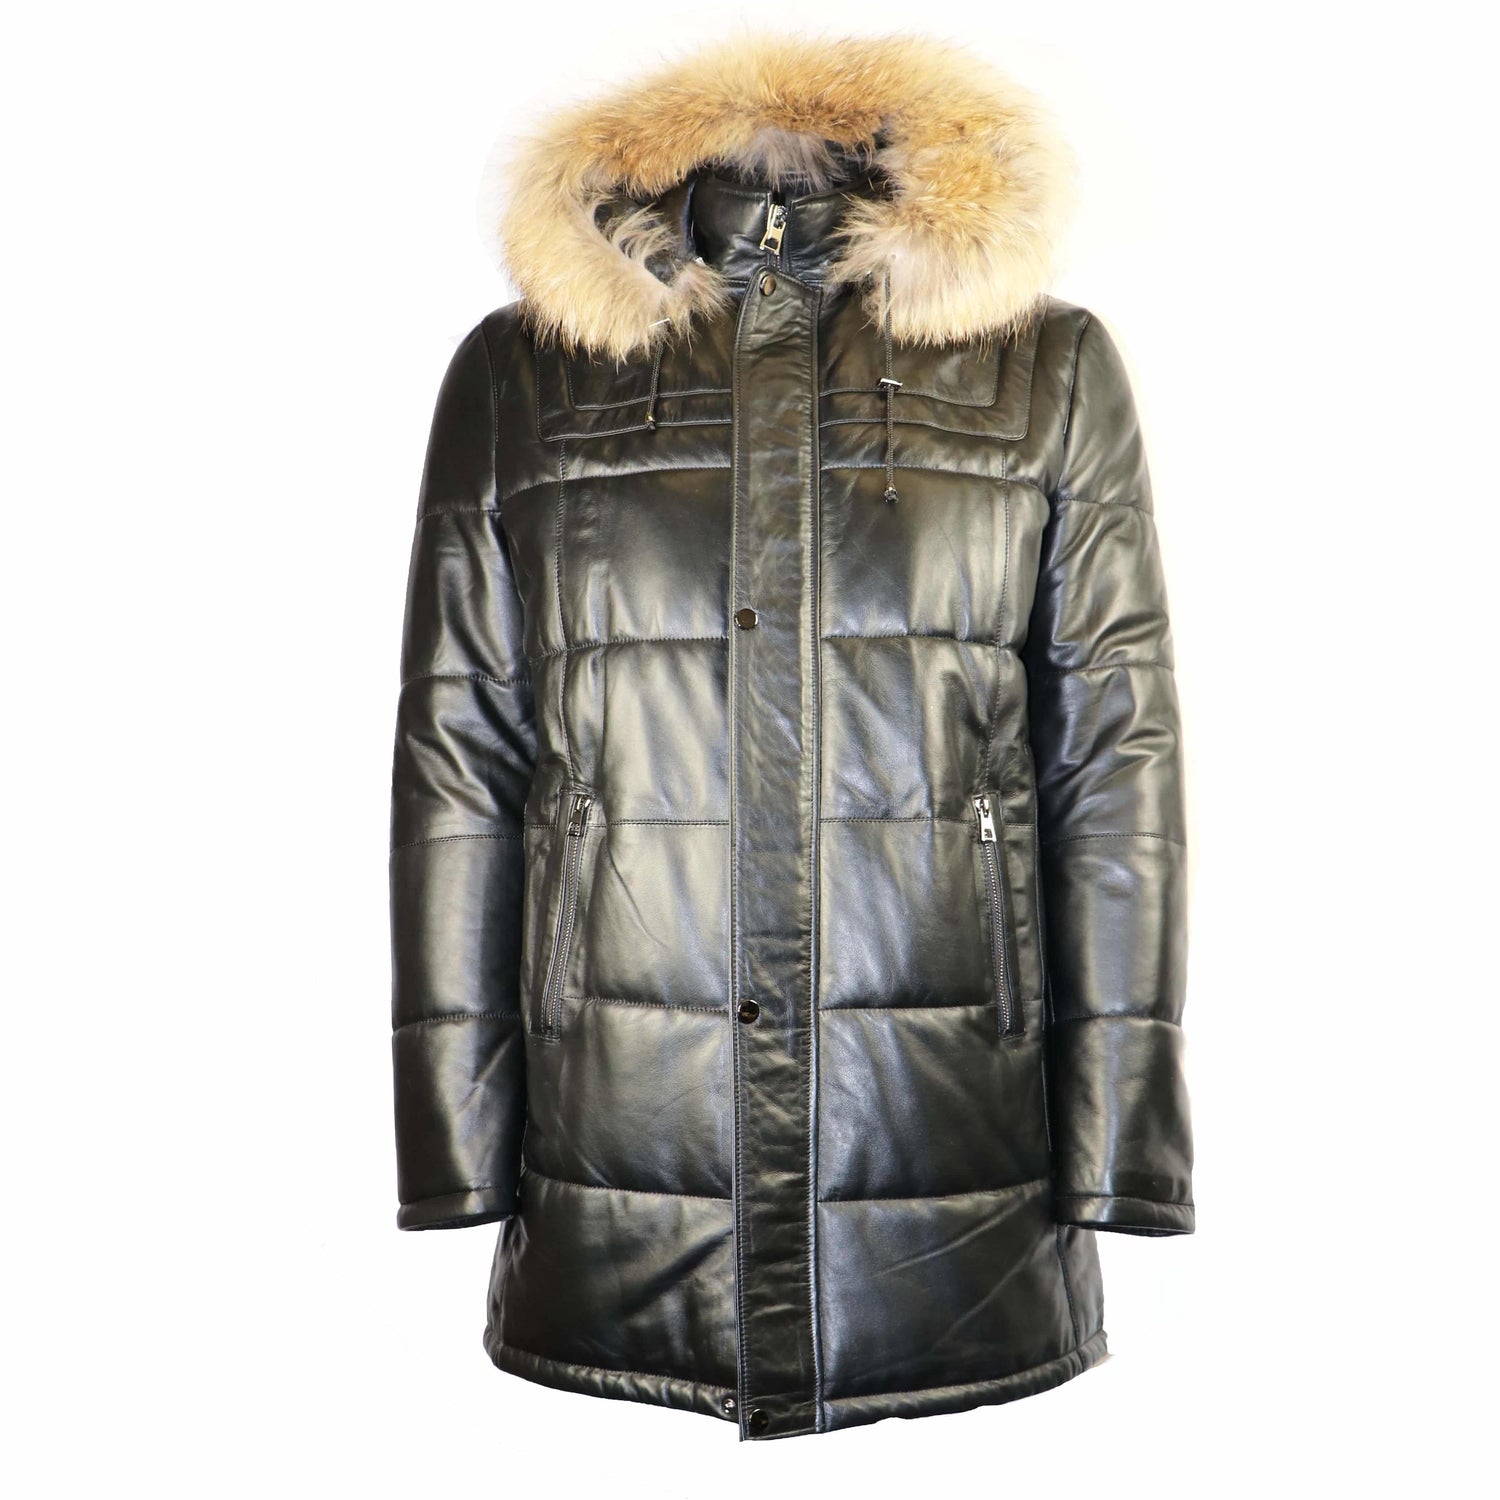 BARYA Men's Leather Bomber Jacket with Real Fur - Zooloo Leather